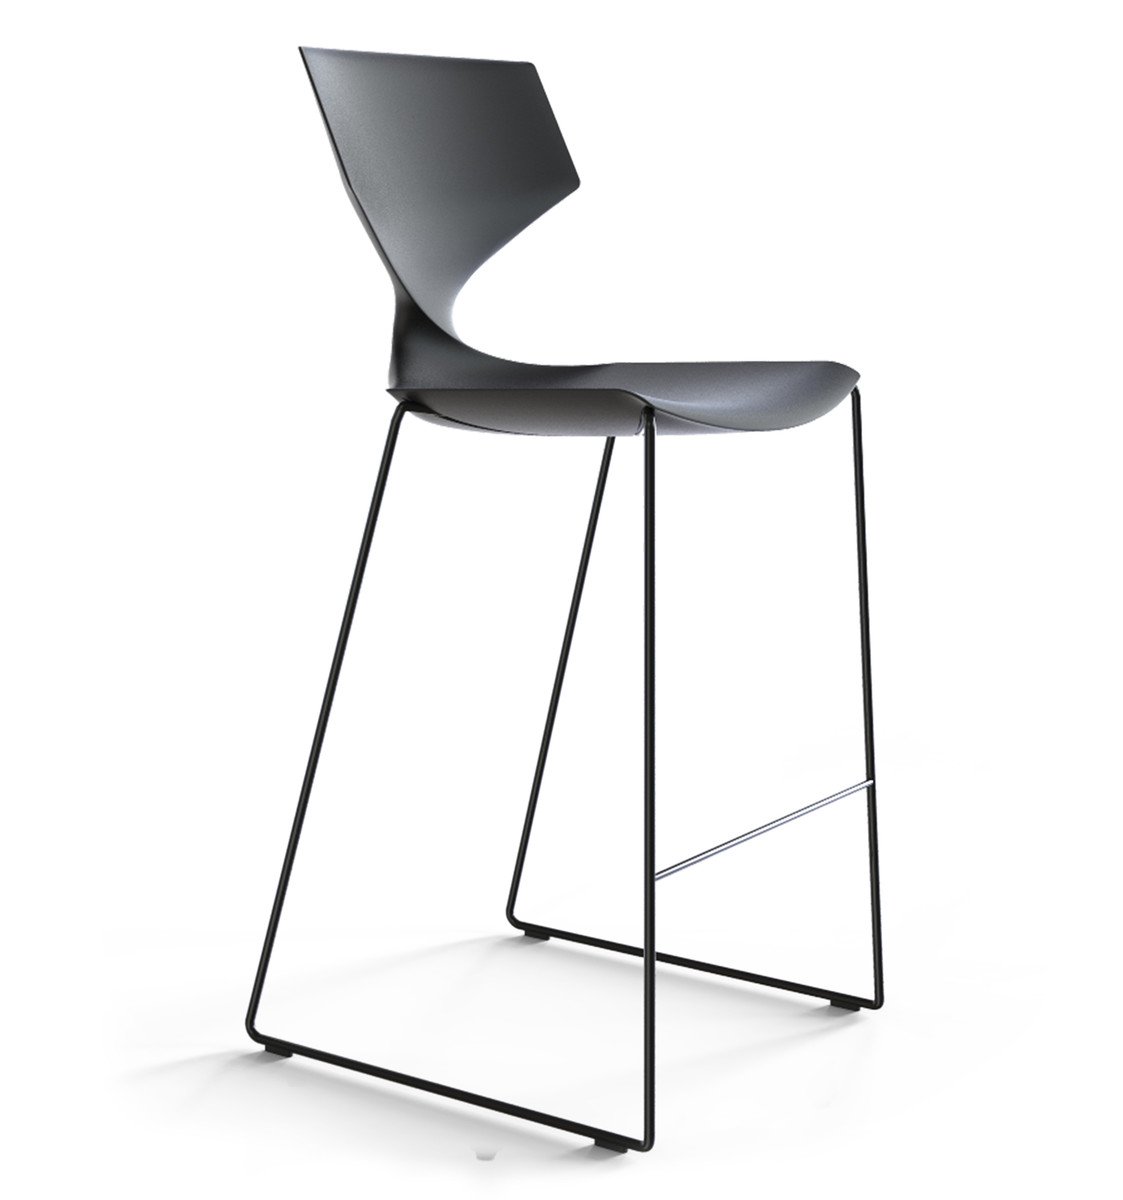 Quo Stool from Tonon, designed by Martin Ballendat